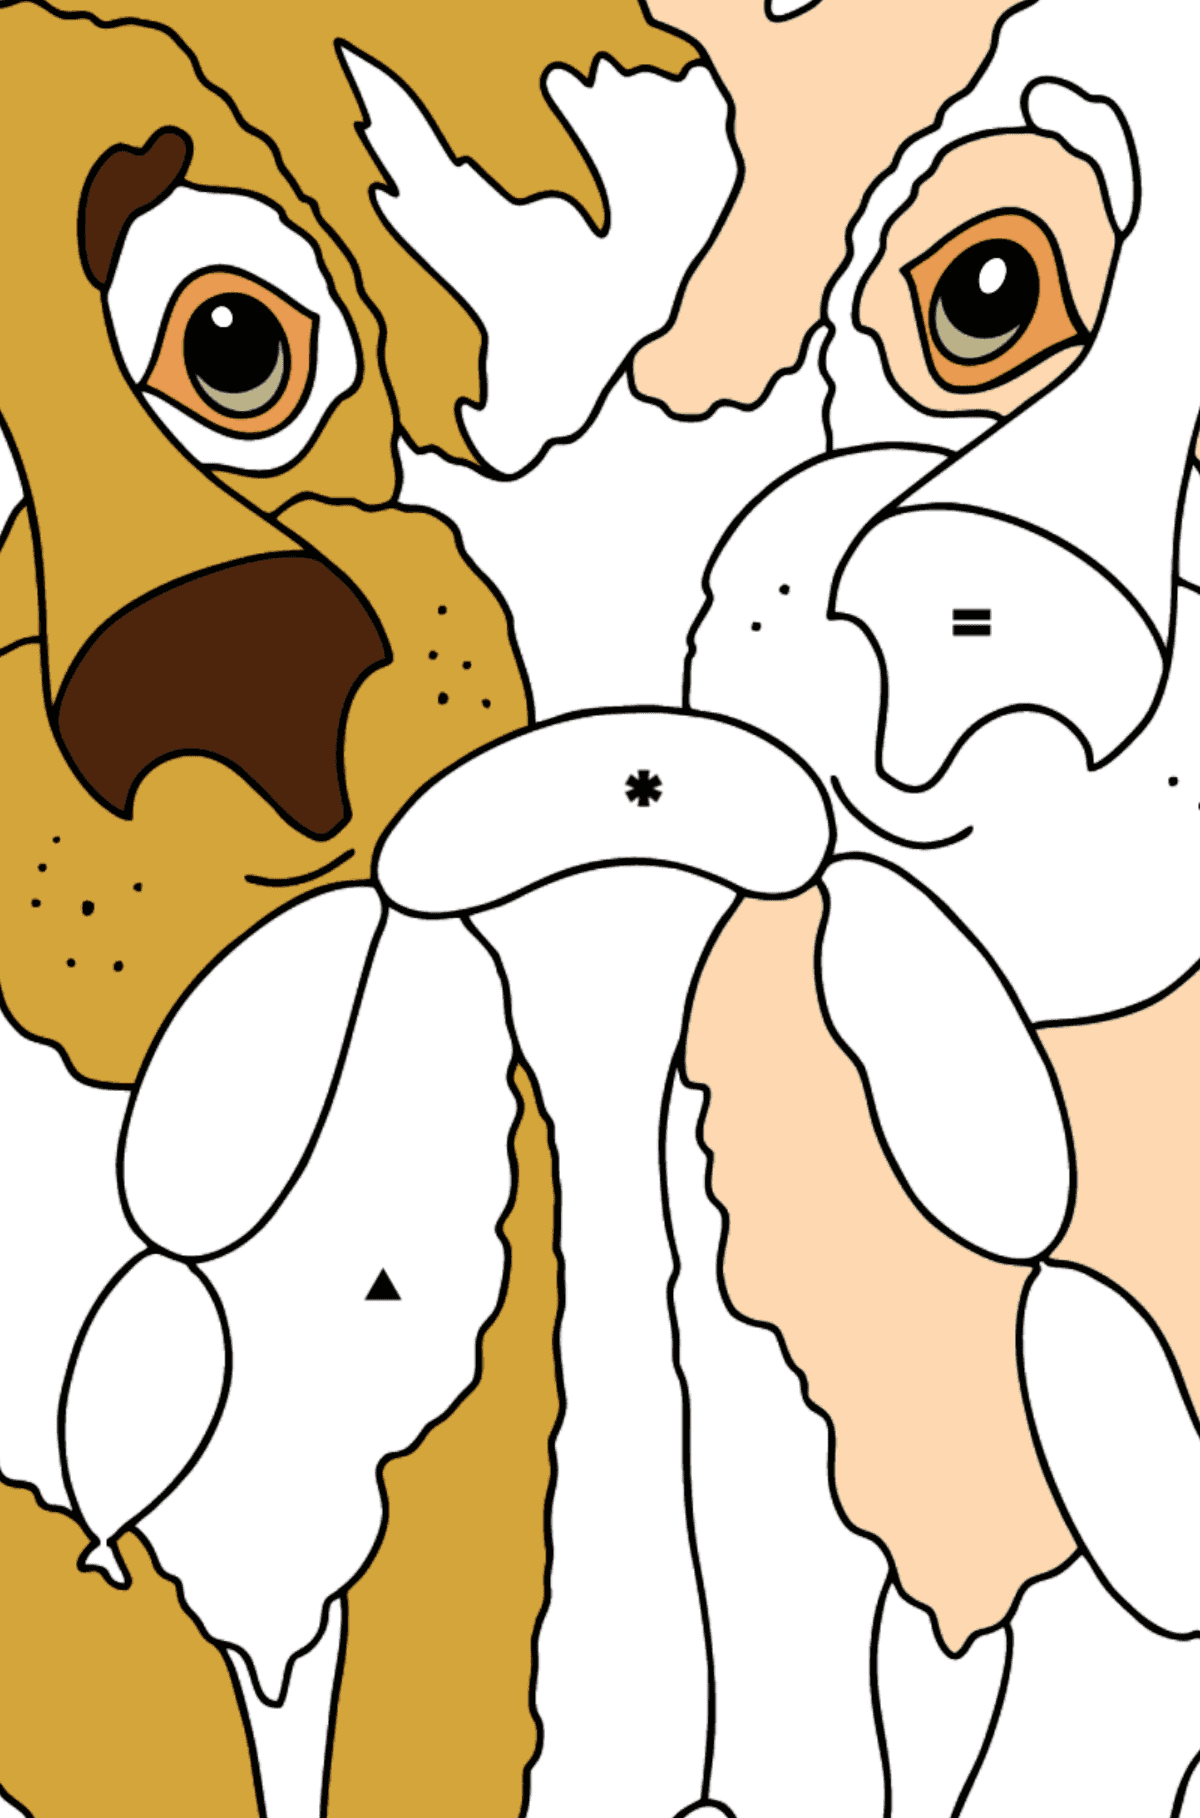 Coloring Page - Dogs Can't Share Sausages - Coloring by Symbols for Kids